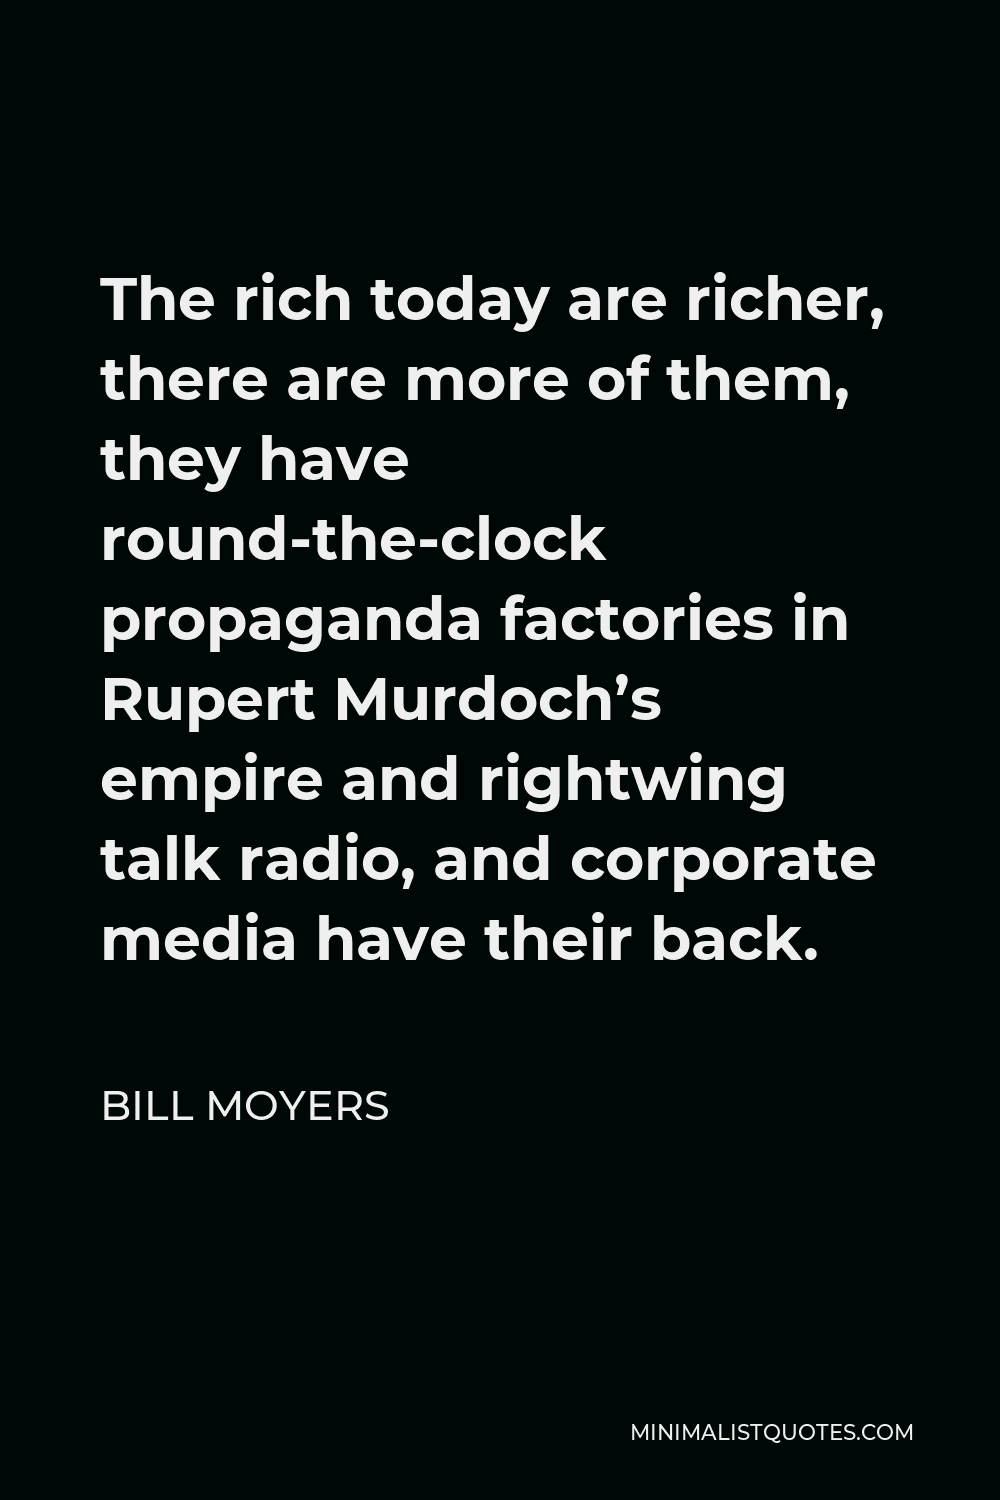 Bill Moyers Quote - The rich today are richer, there are more of them, they have round-the-clock propaganda factories in Rupert Murdoch’s empire and rightwing talk radio, and corporate media have their back.